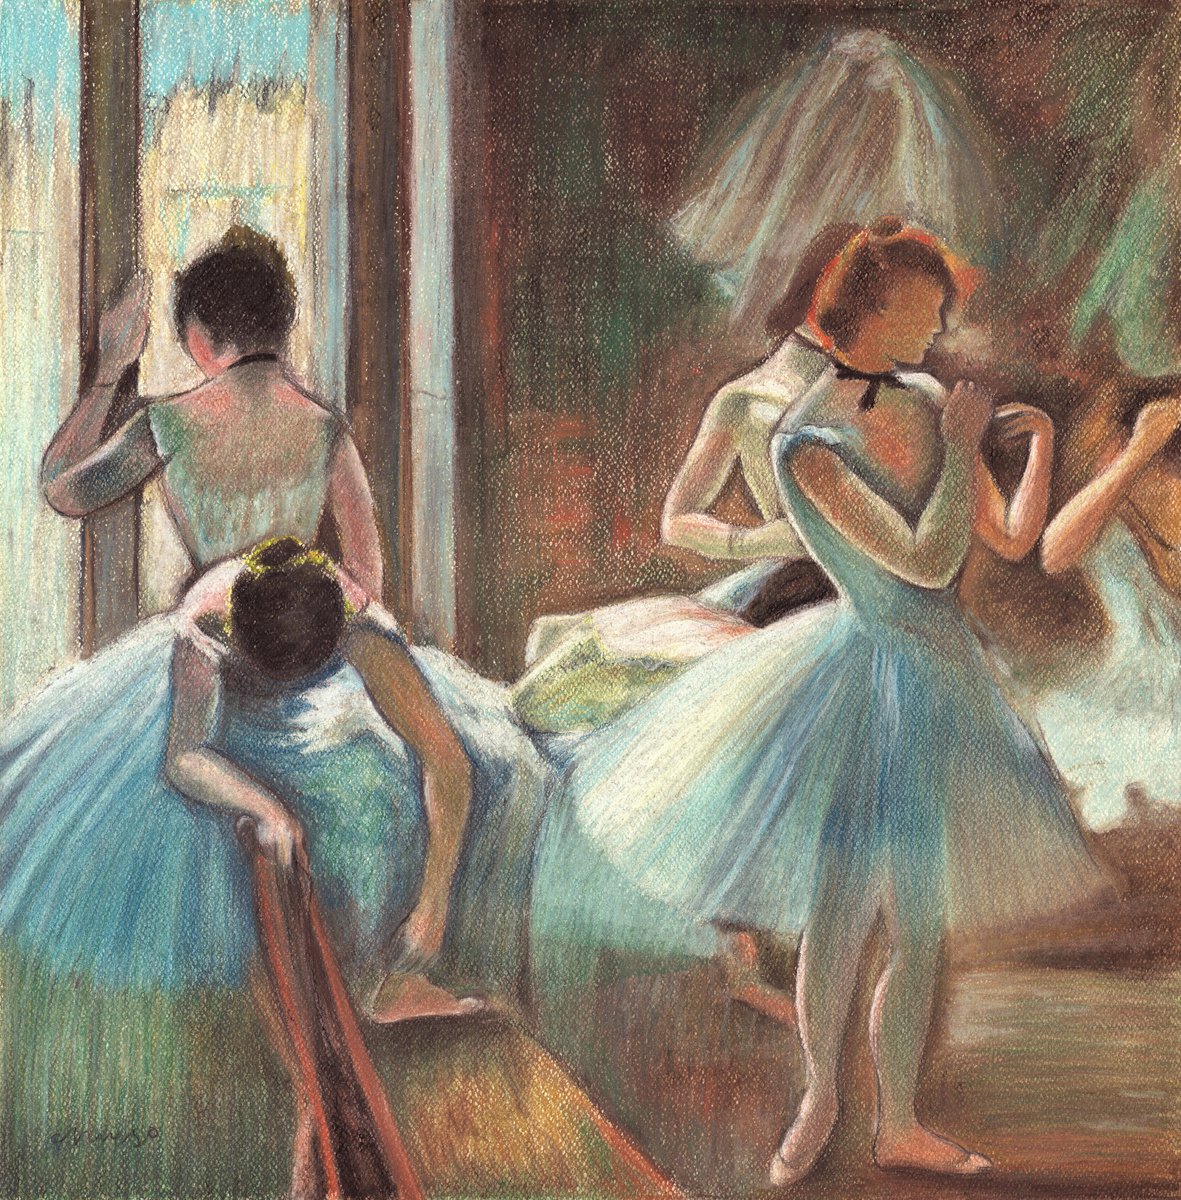 Study after French Master Edgar Degas THE BALLET CLASS by Nives Palmic